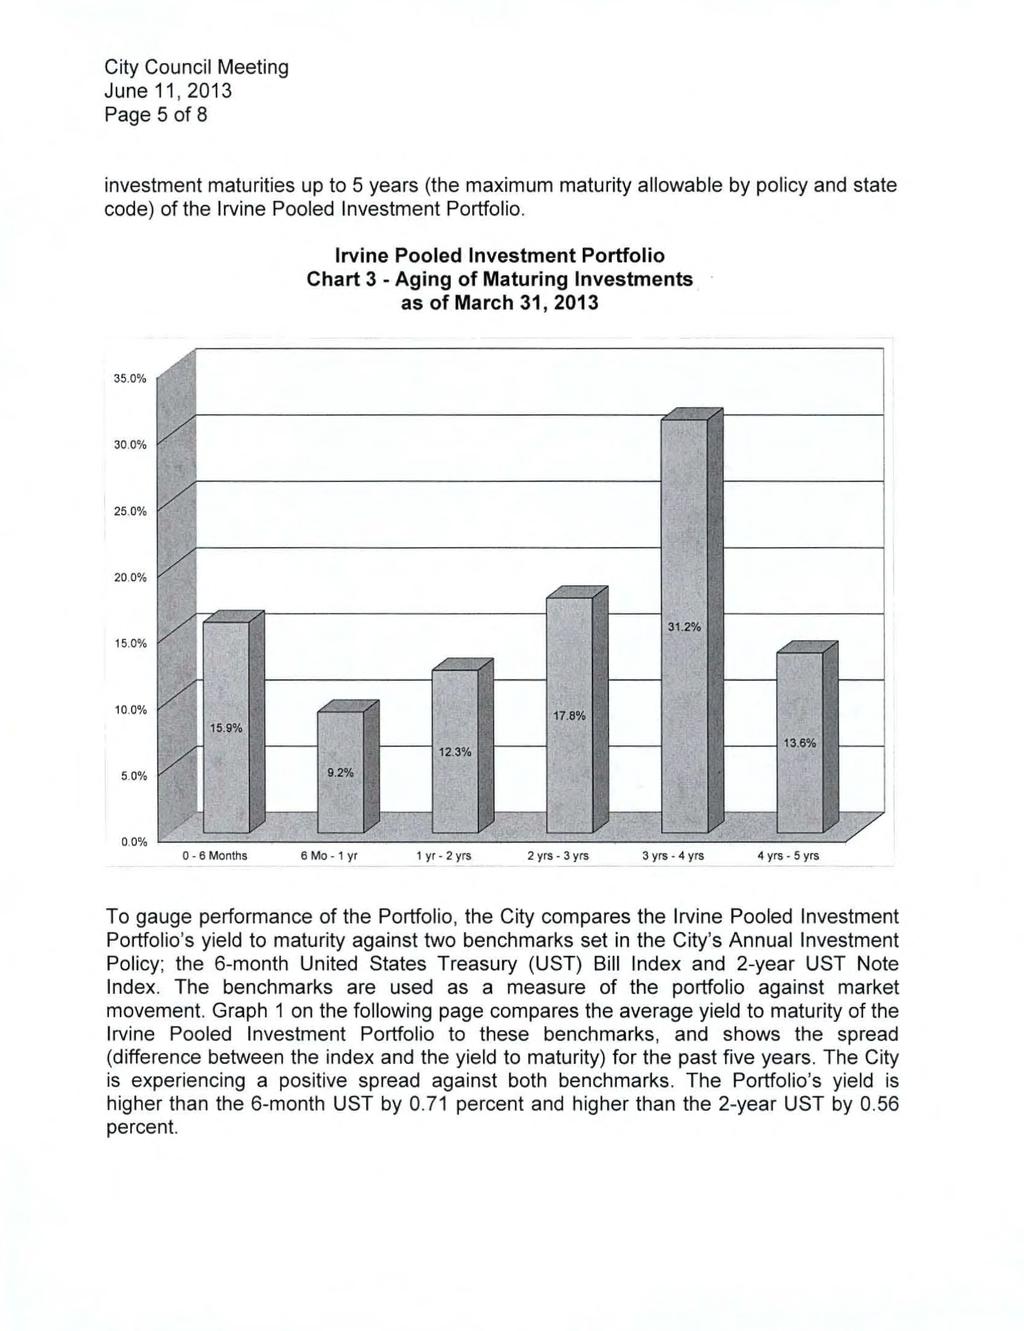 Page 5 of 8 investment maturities up to 5 years (the maximum maturity allowable by policy and state code) of the. Chart 3 - Aging of Maturing Investments as of March 31, 2013 35.